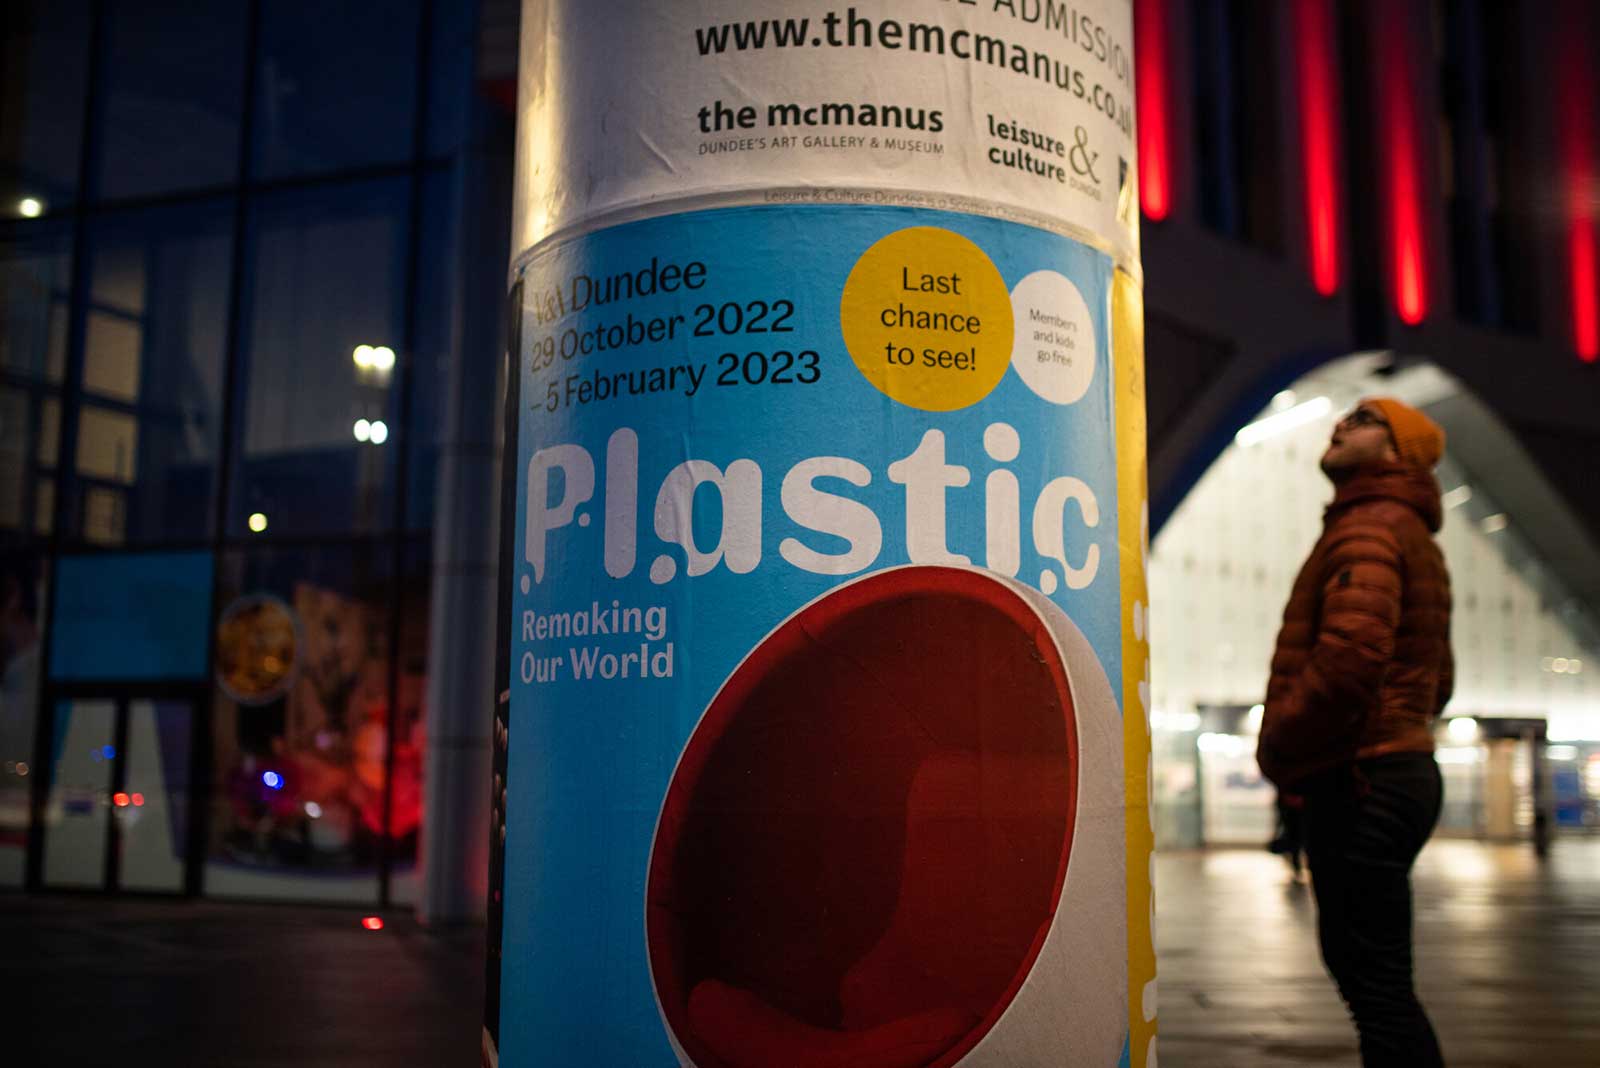 V&A Dundee: Plastic - Remaking Our World